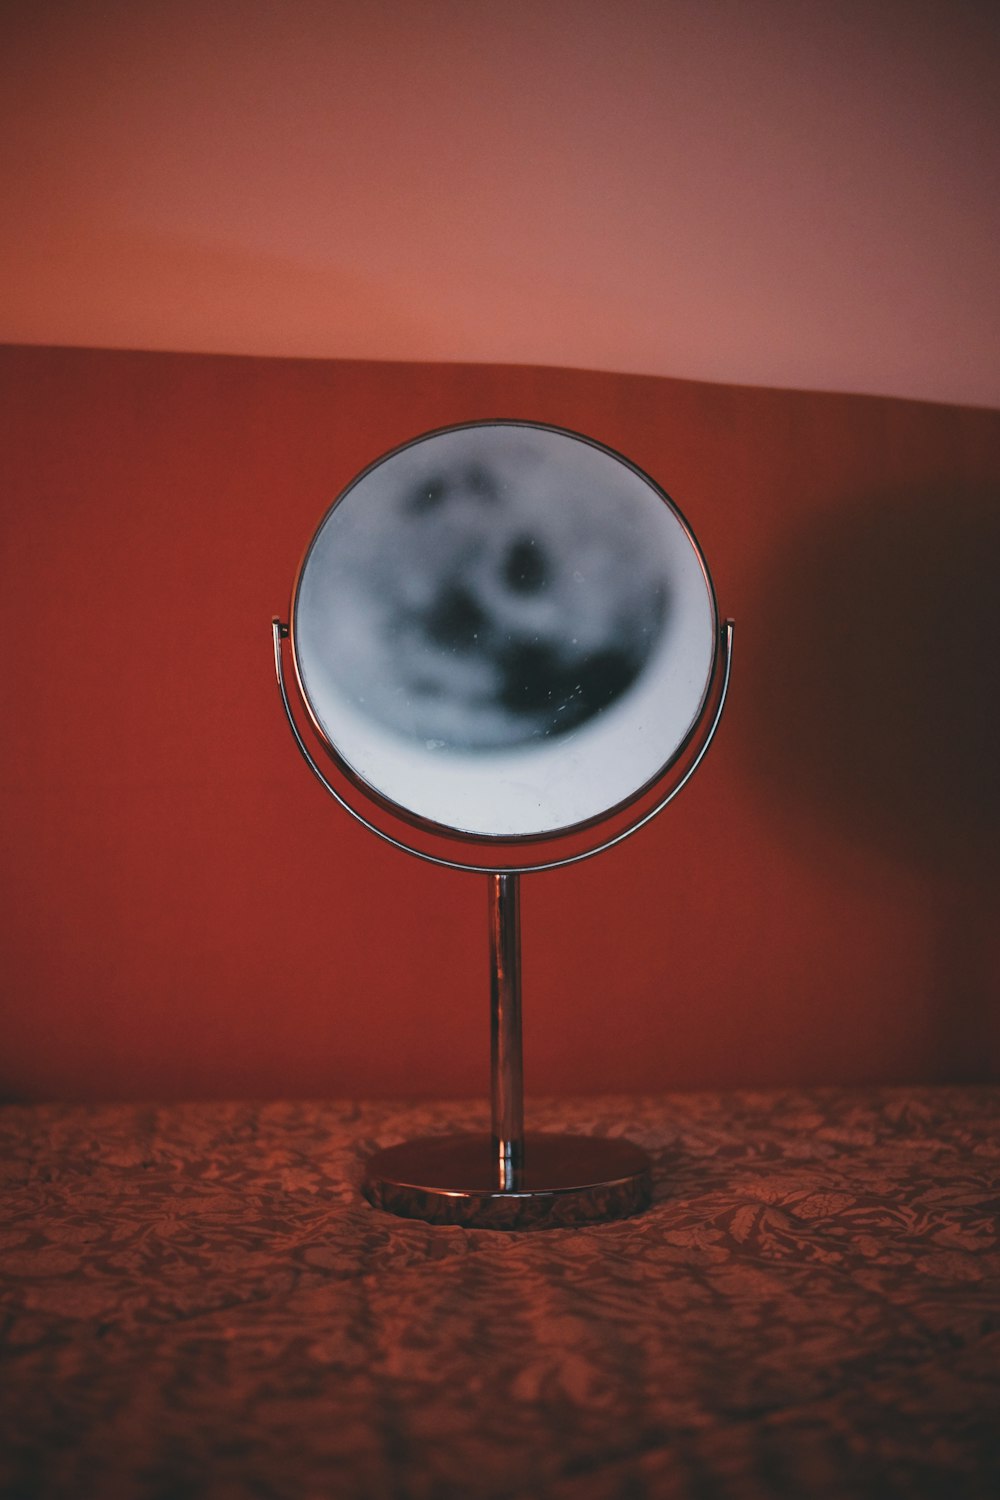 a mirror on a stand on a table